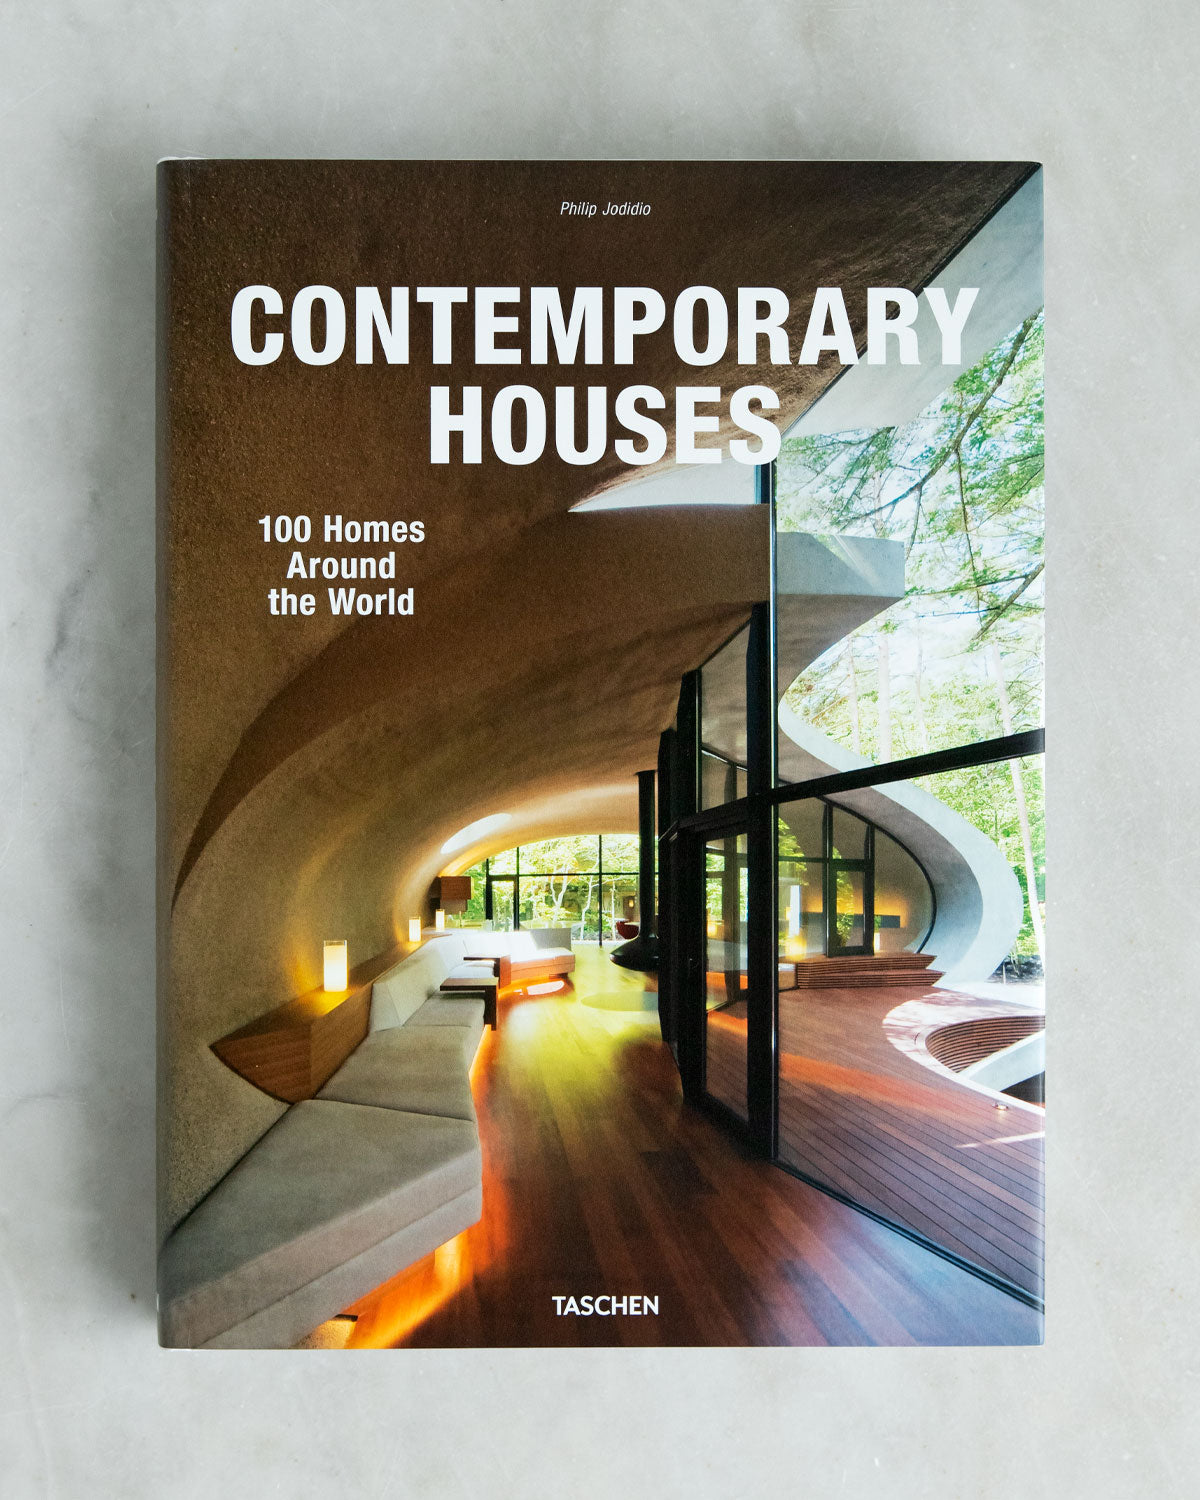 Contemporary Houses: 100 Homes Around the World